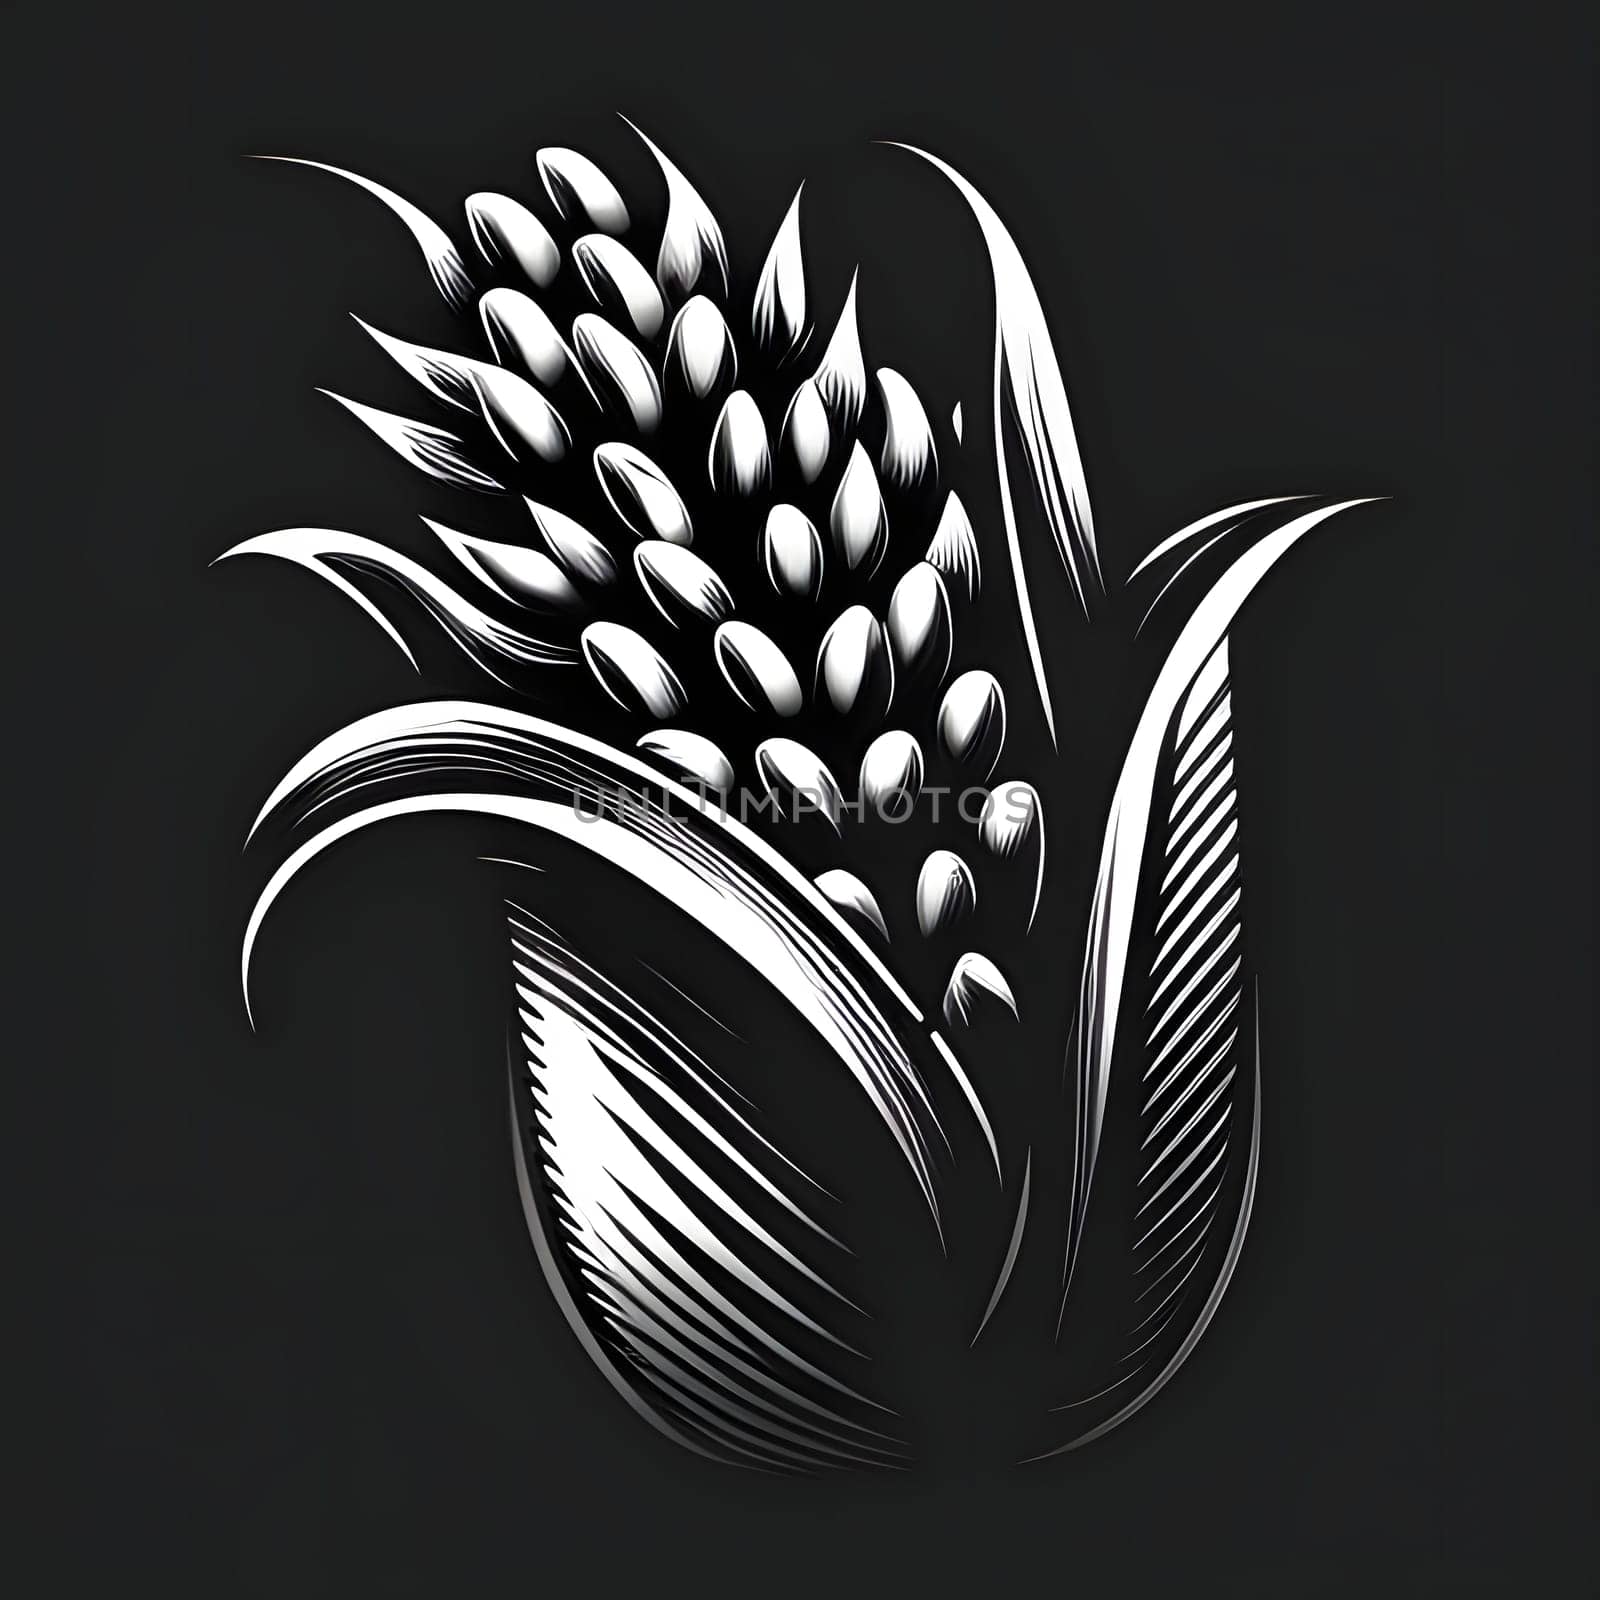 Logo corn cob with leaf engraving black and white sketch. Corn as a dish of thanksgiving for the harvest. An atmosphere of joy and celebration.